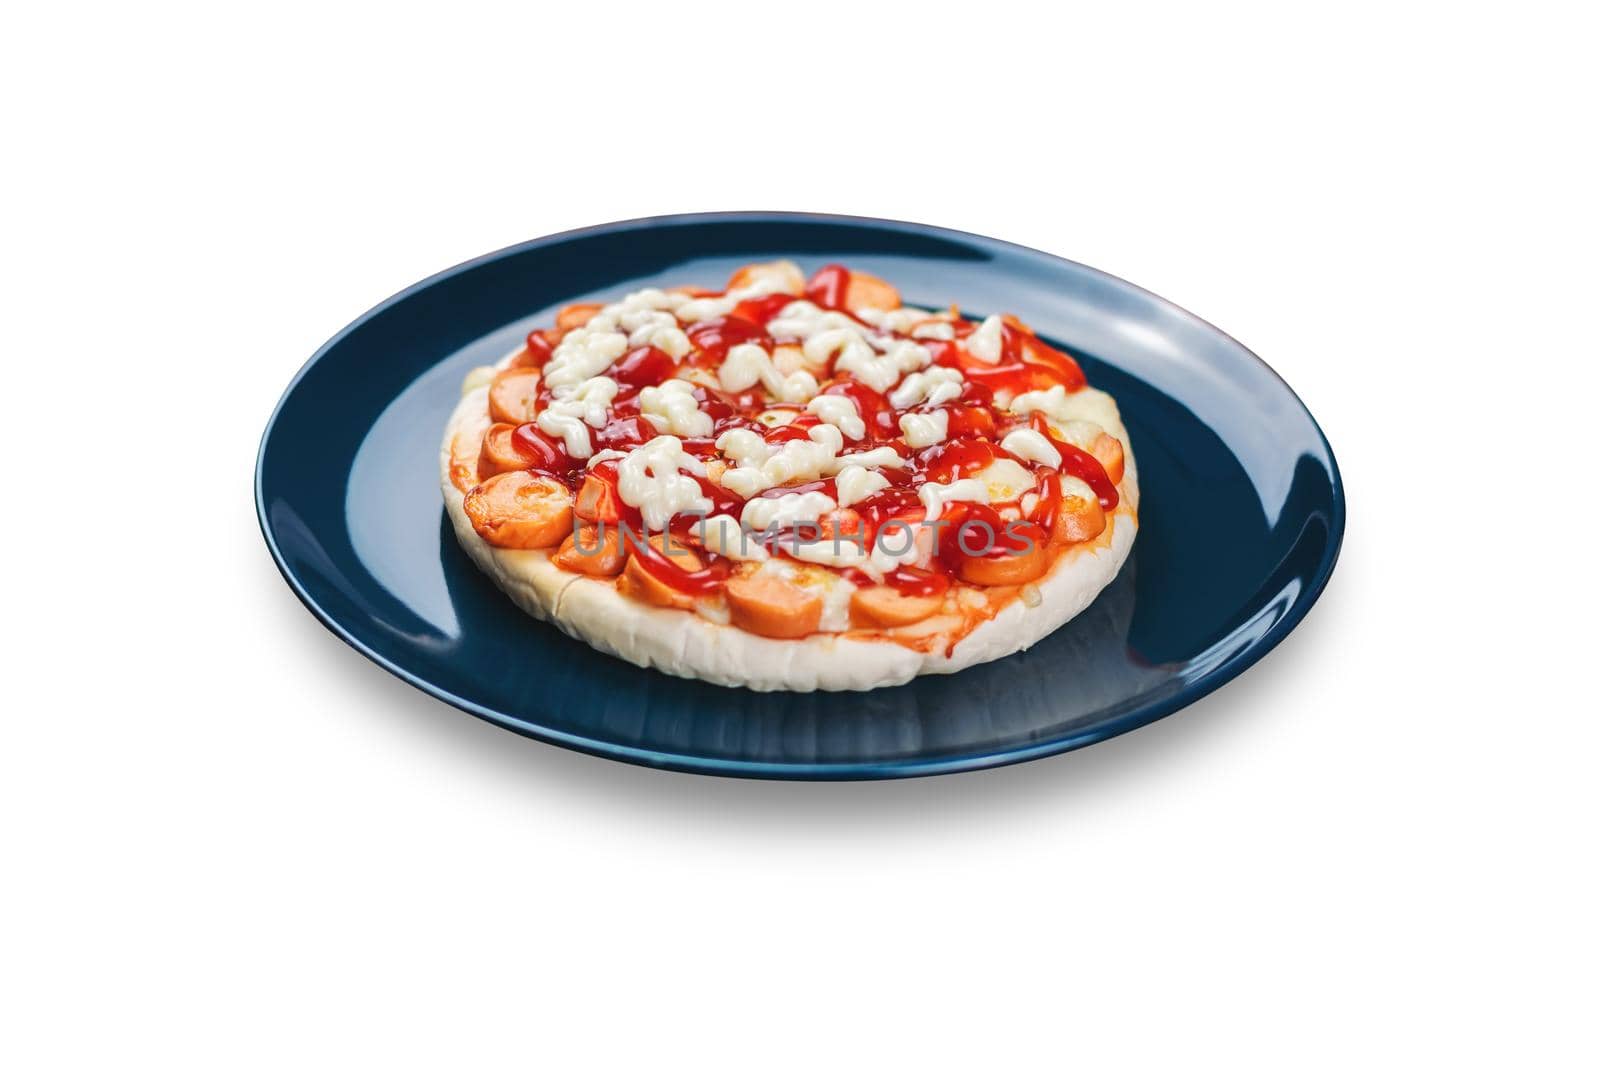 Sausage and Crab Stick Pizza in a ceramic plate on white background. by wattanaphob